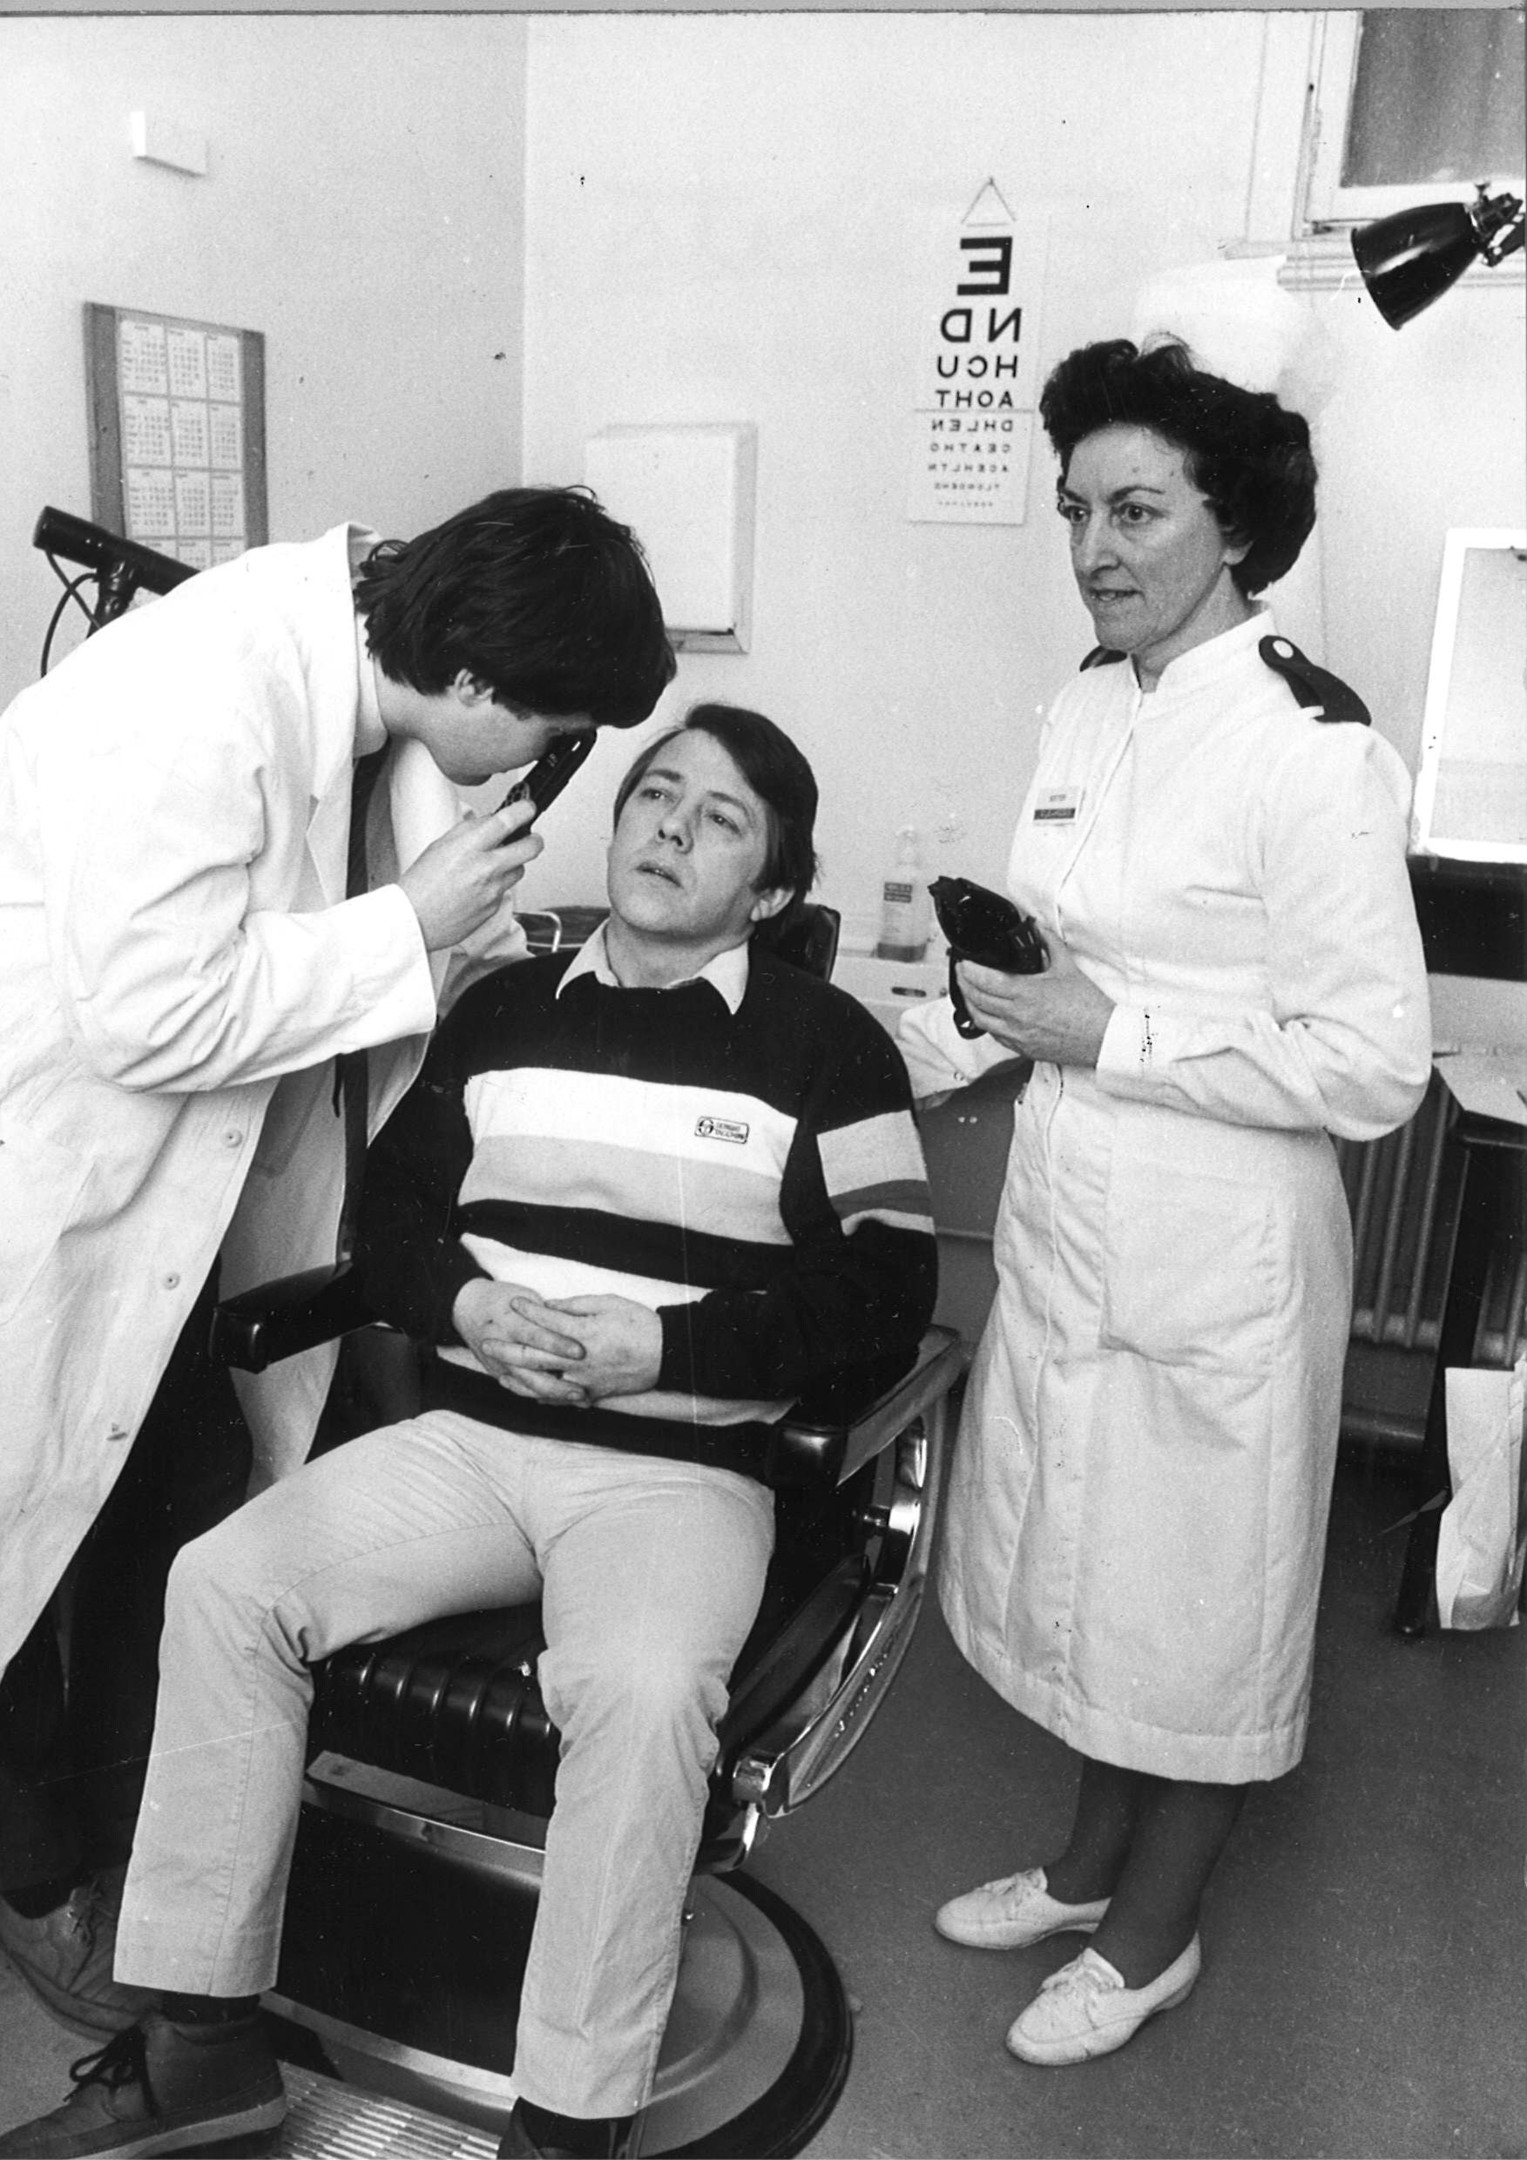 Patient examined in WH eye clinic in 1985